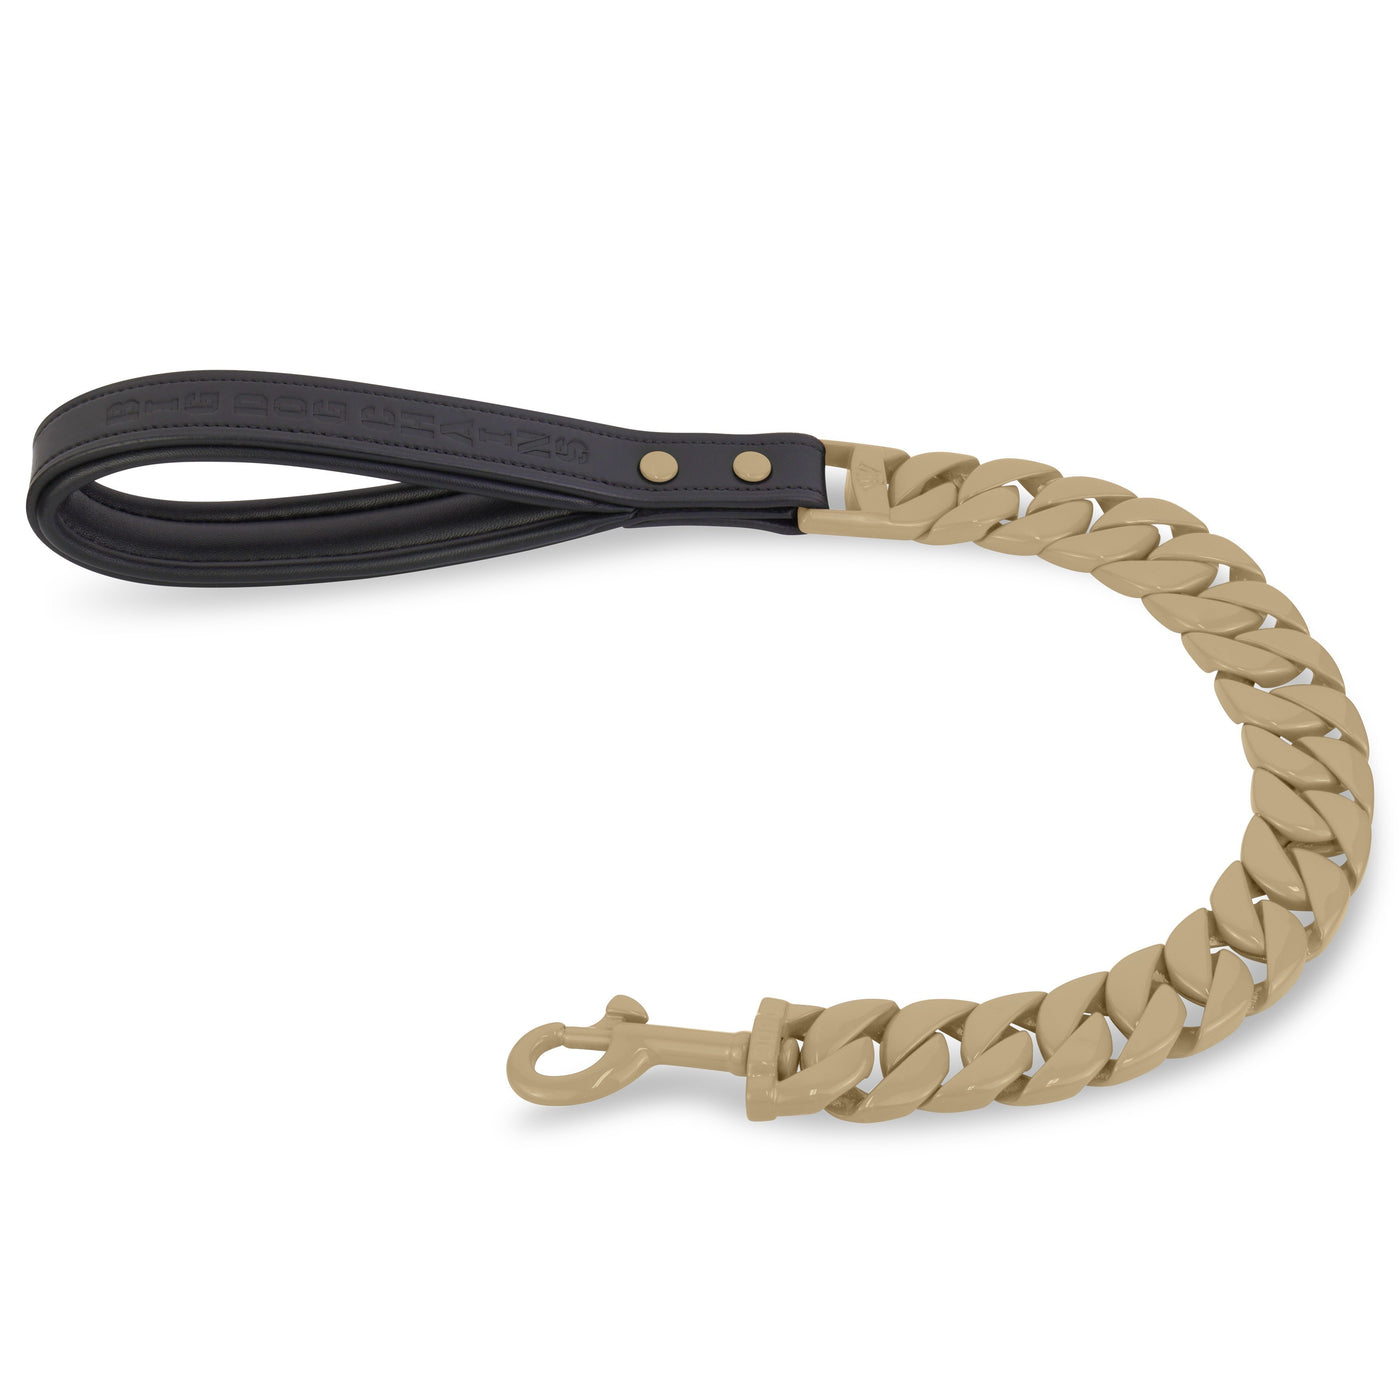 SAHARA_BEIGE_DESERT_NUDE_SAND_Leash_Cuban_Link_XL_Lead_For_Strong_Dogs__Guaranteed_to_Last_for_Life_Ideal_for_XL_Dog_Breeds_Like_XL_Bully_Cane_Corso_Bull_Mastiff_Bulldog_and_More_BIG_DOG_CHAINS